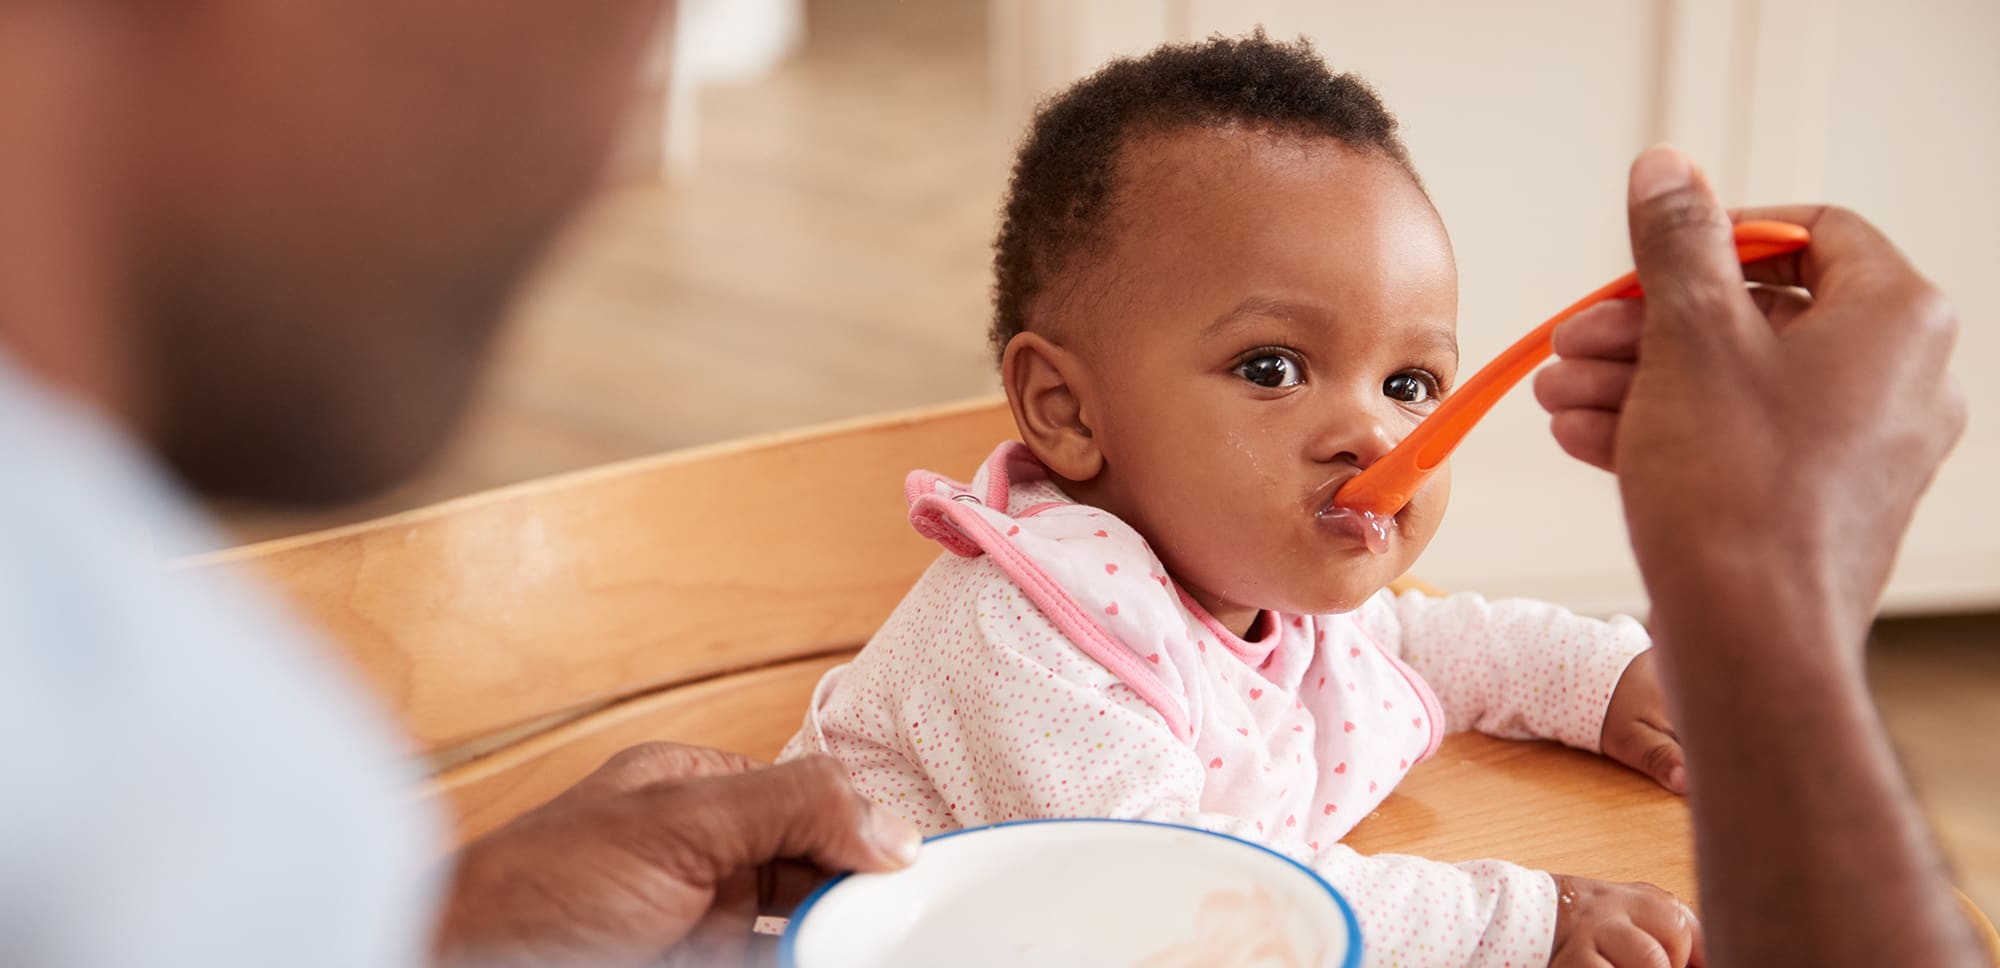 person spoon-feeding baby food to infant.